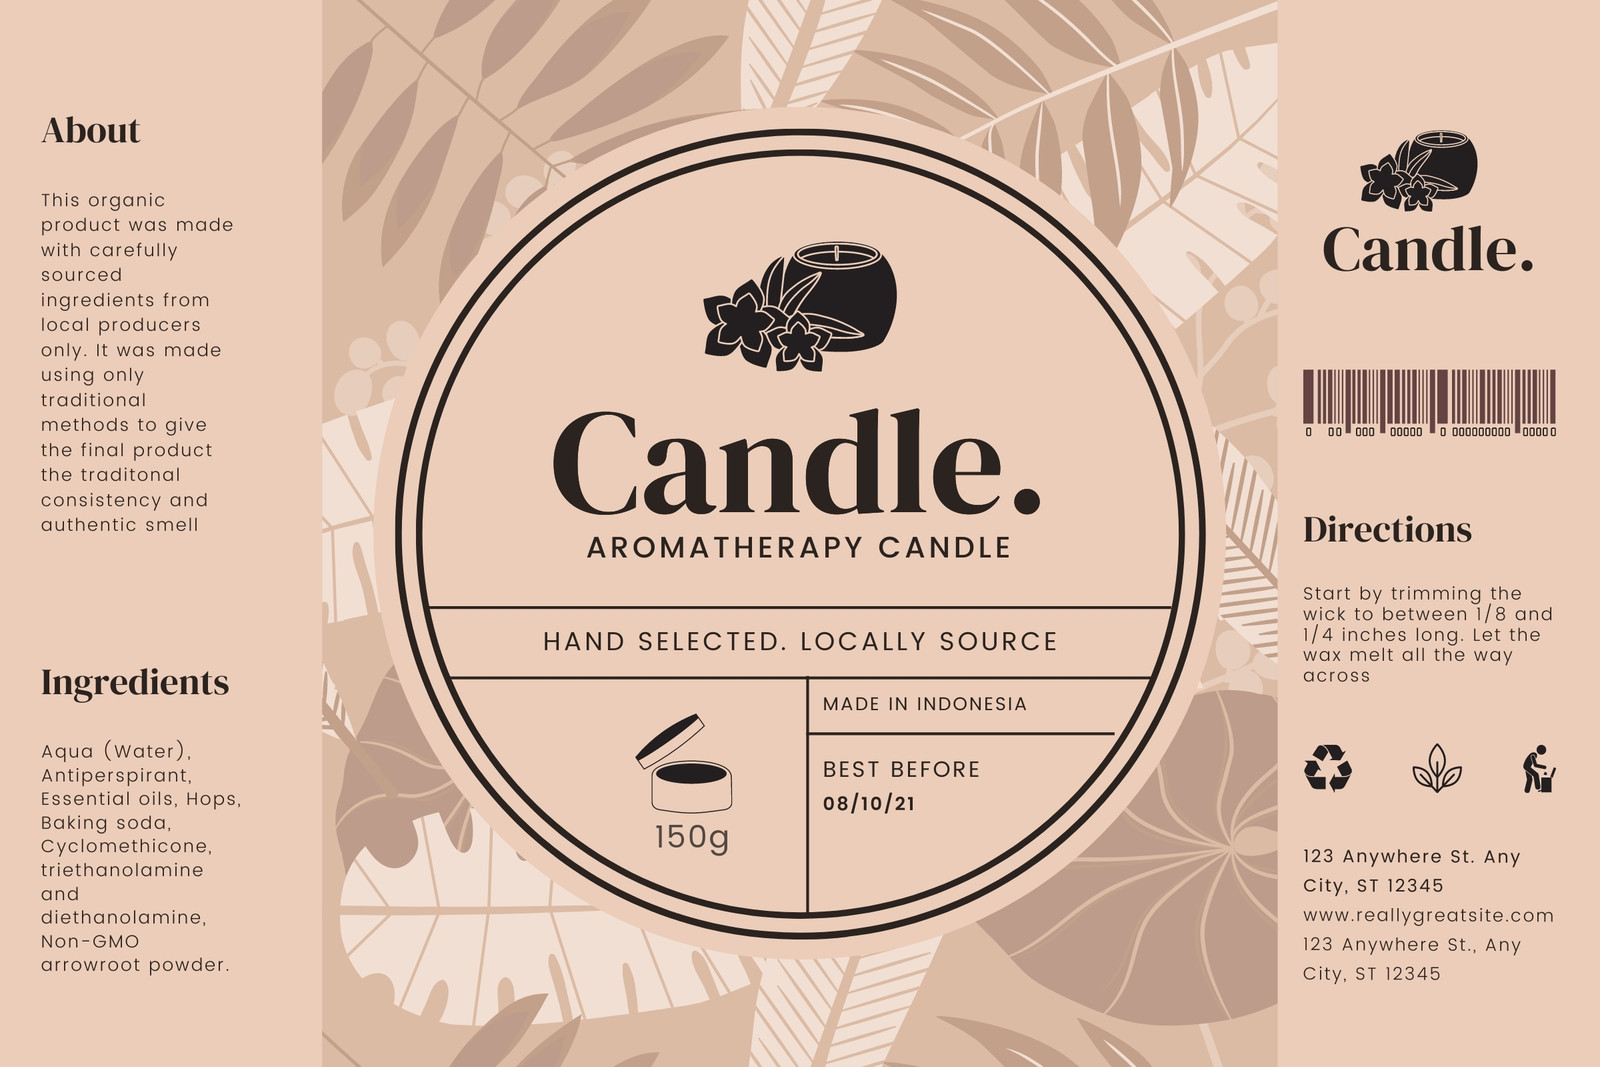 Candle Labels - Blank or Custom Printed